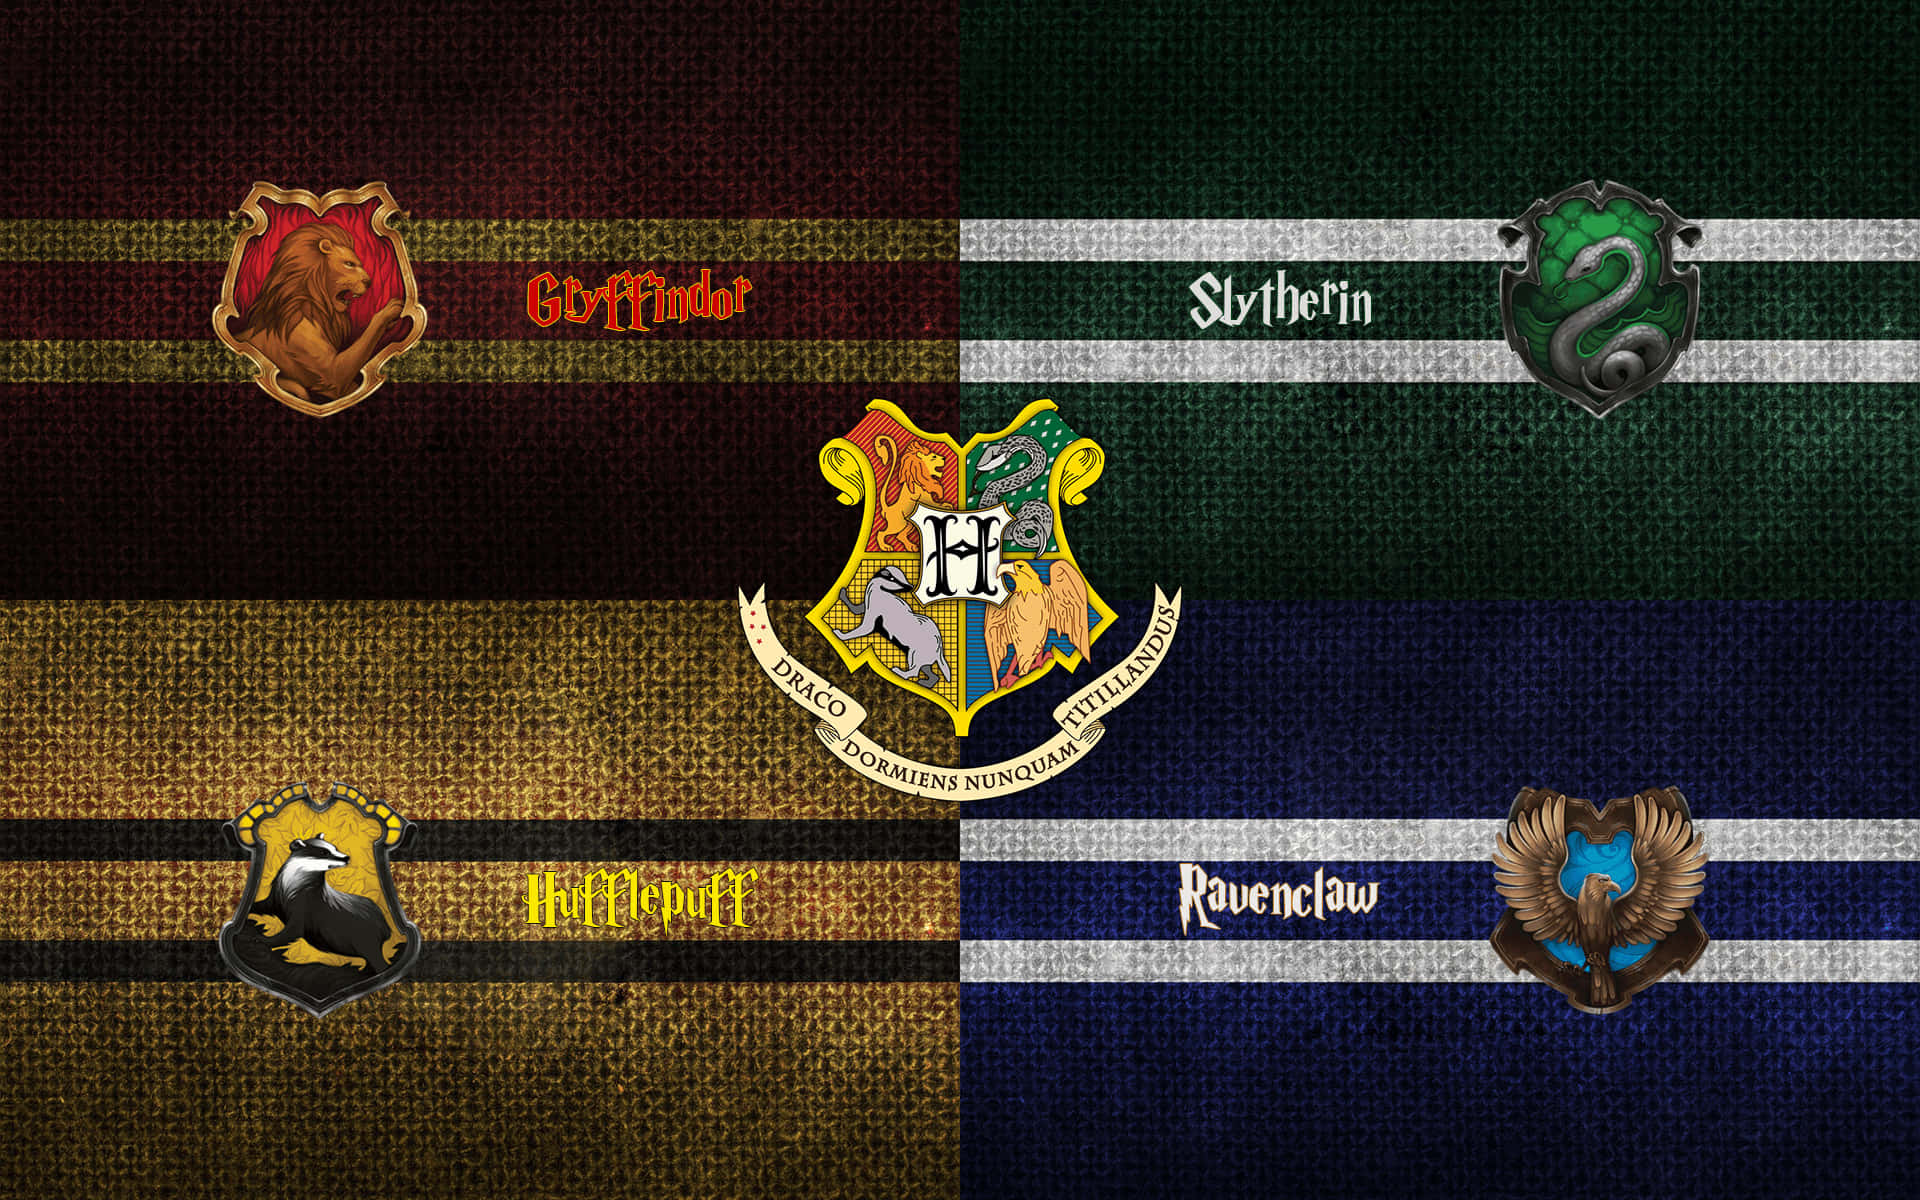 Join the House of Gryffindor